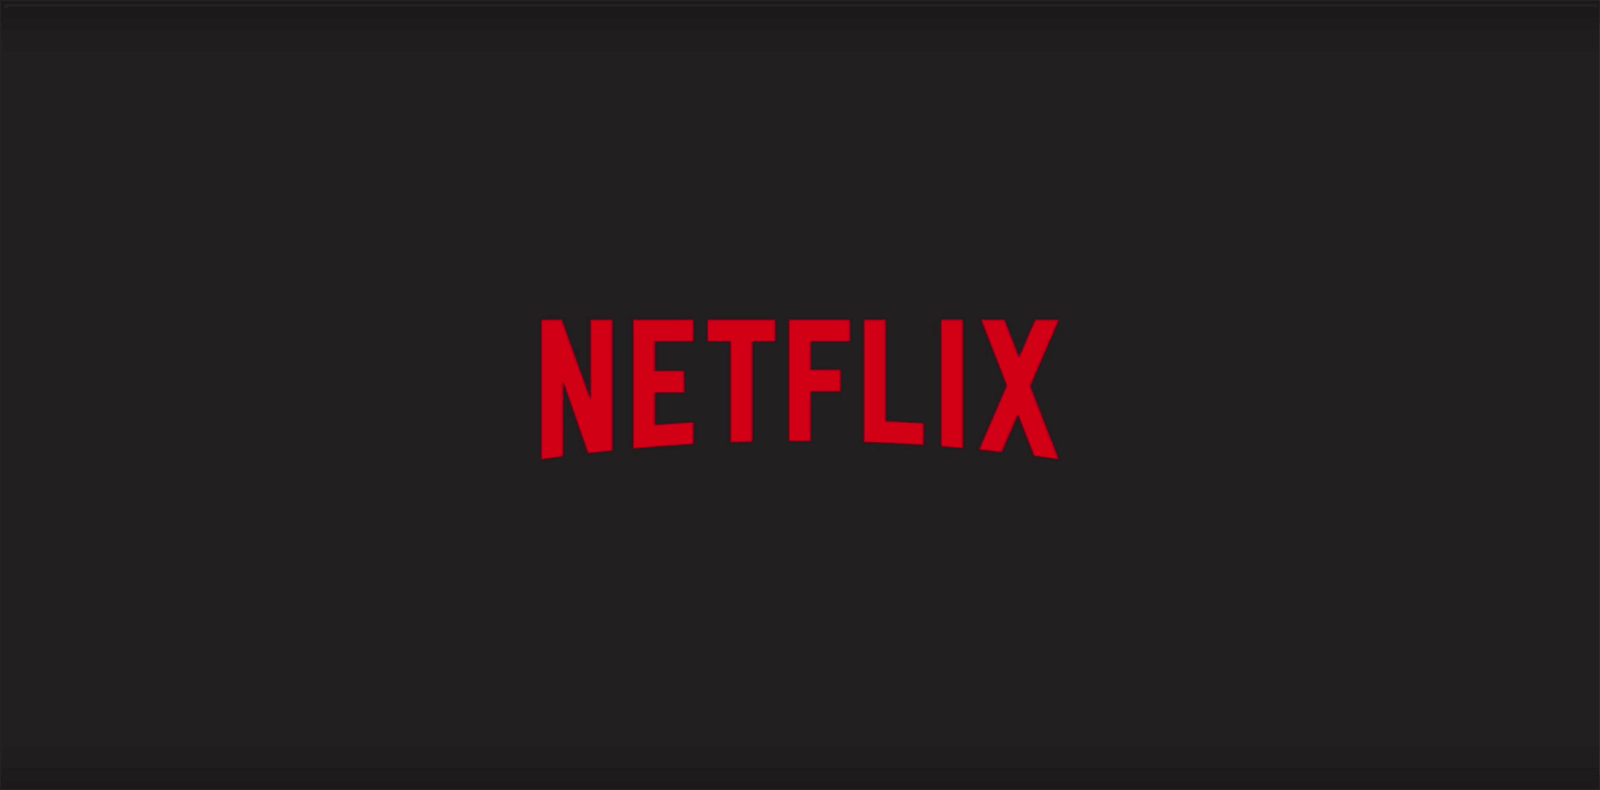 Learning from Netflix's New Logo Design | Brand Analysis